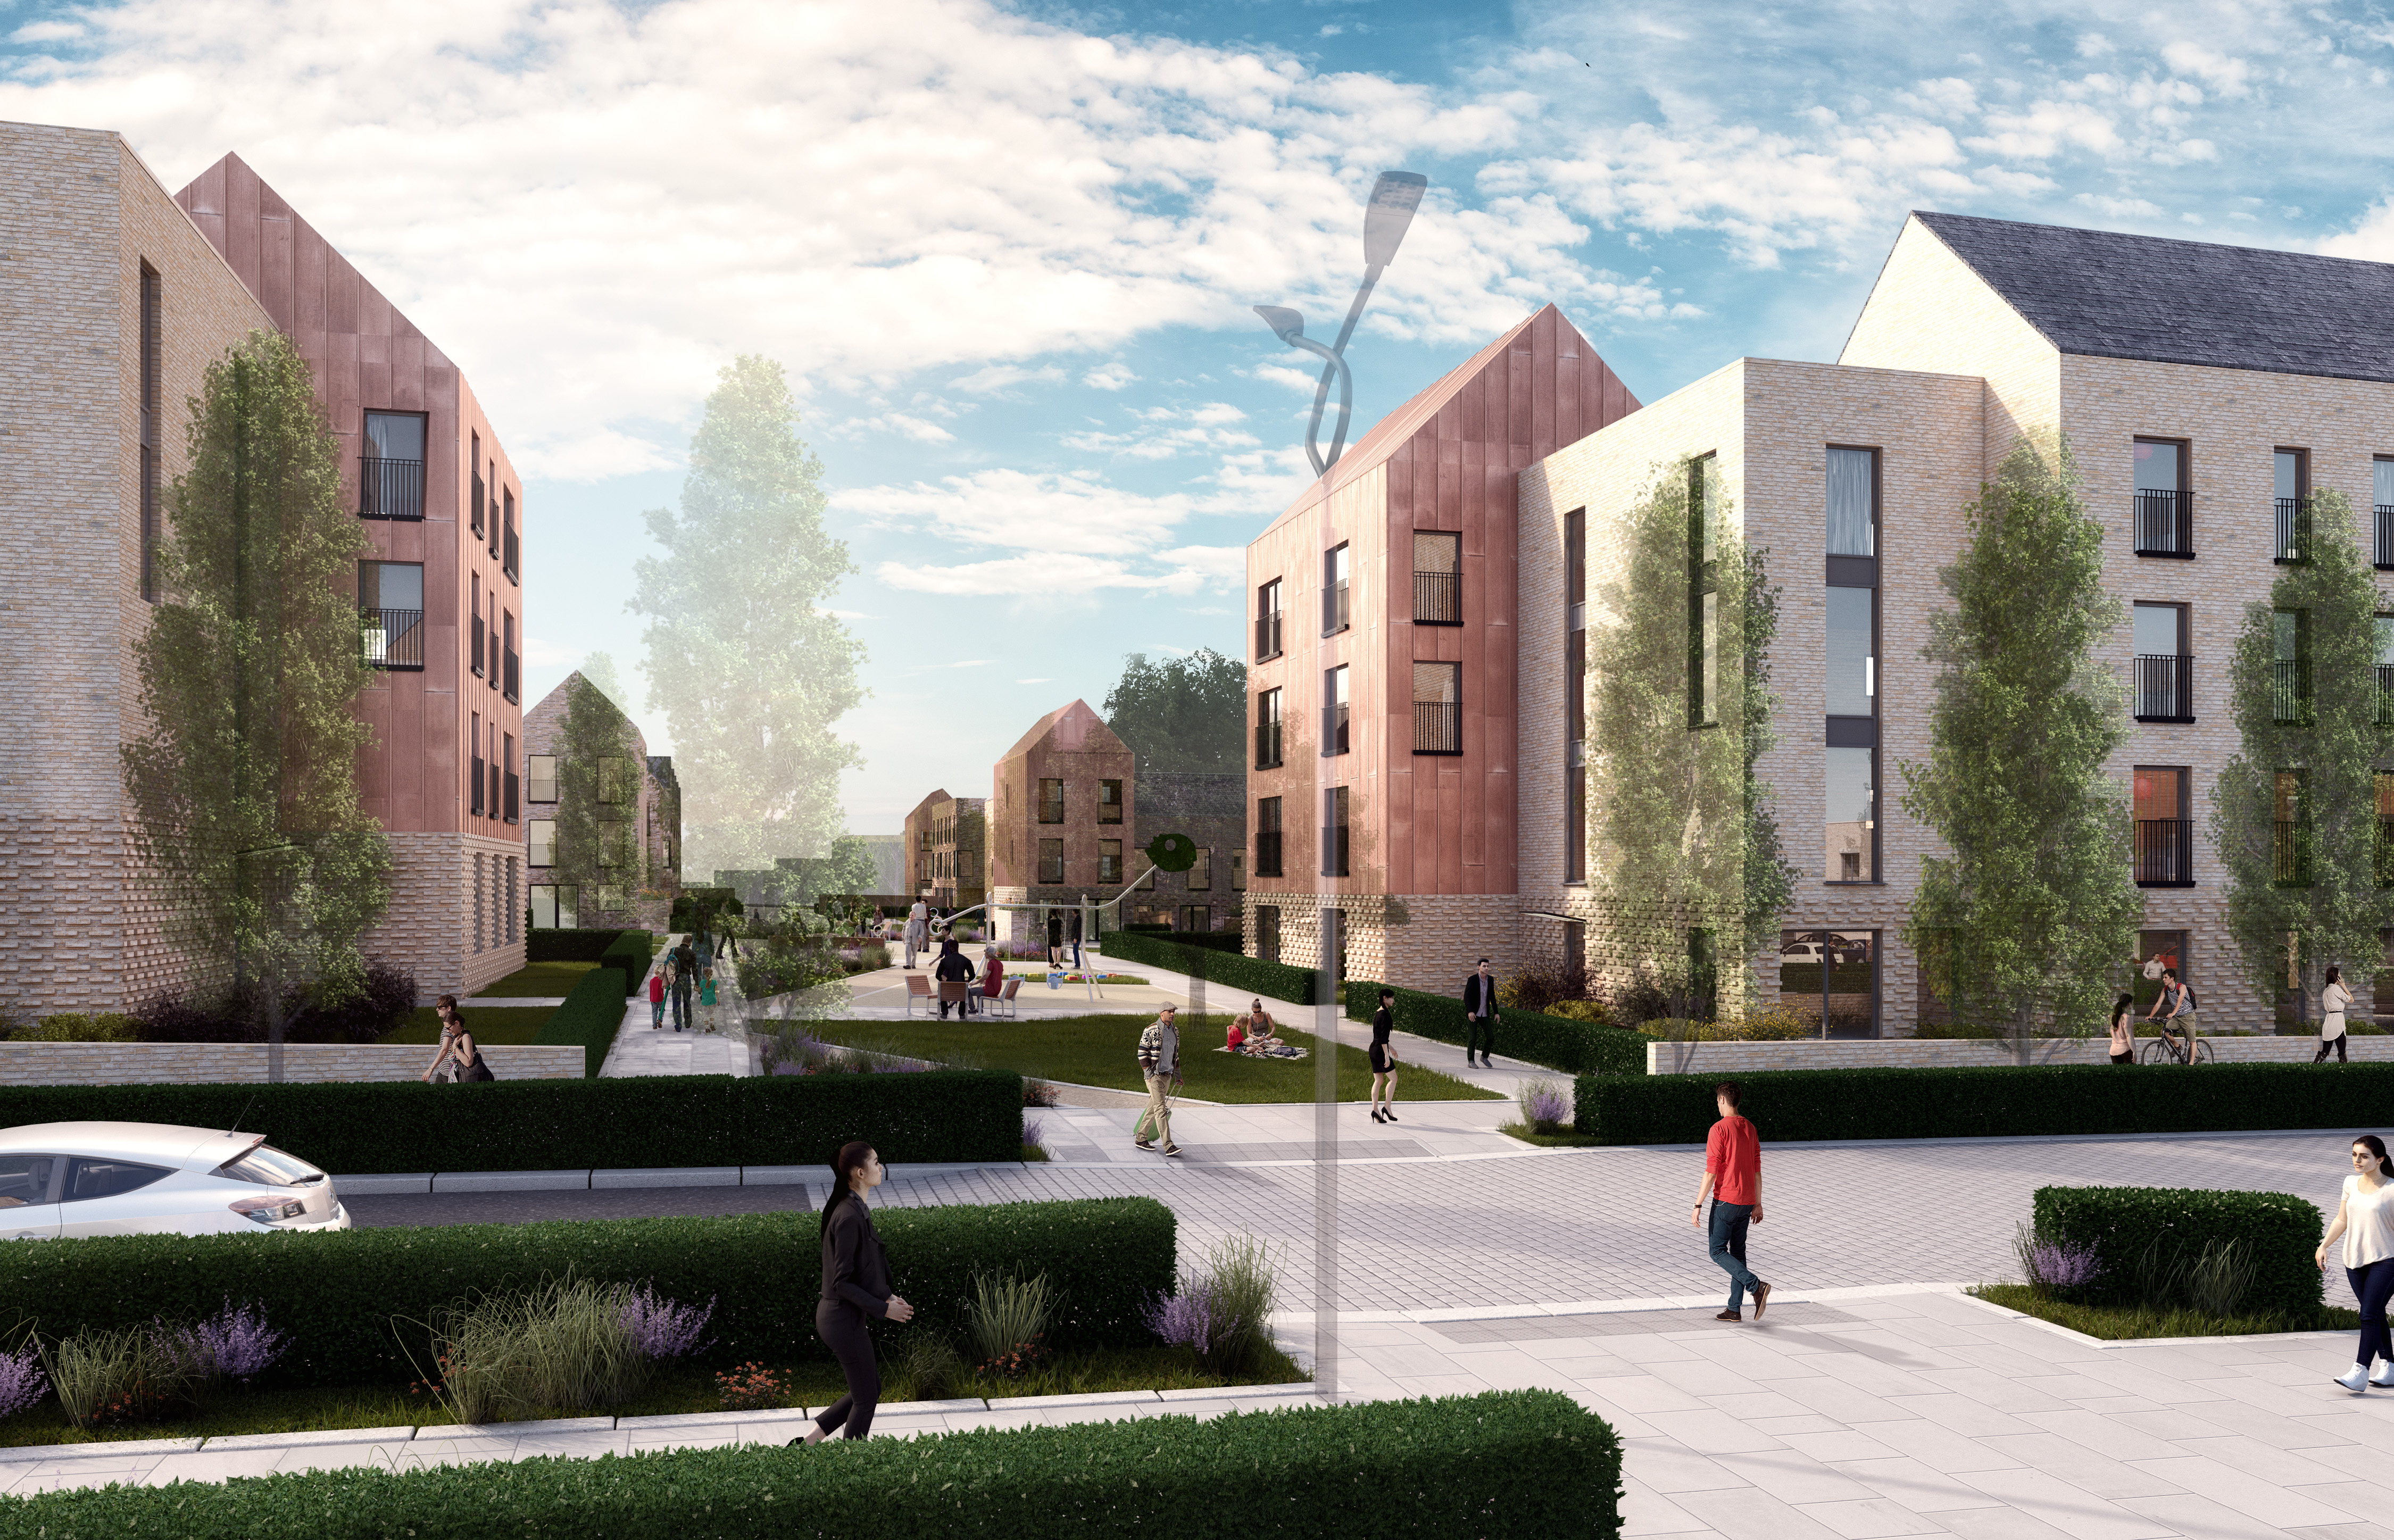 Keepmoat launches flagship 824-home development at Sighthill